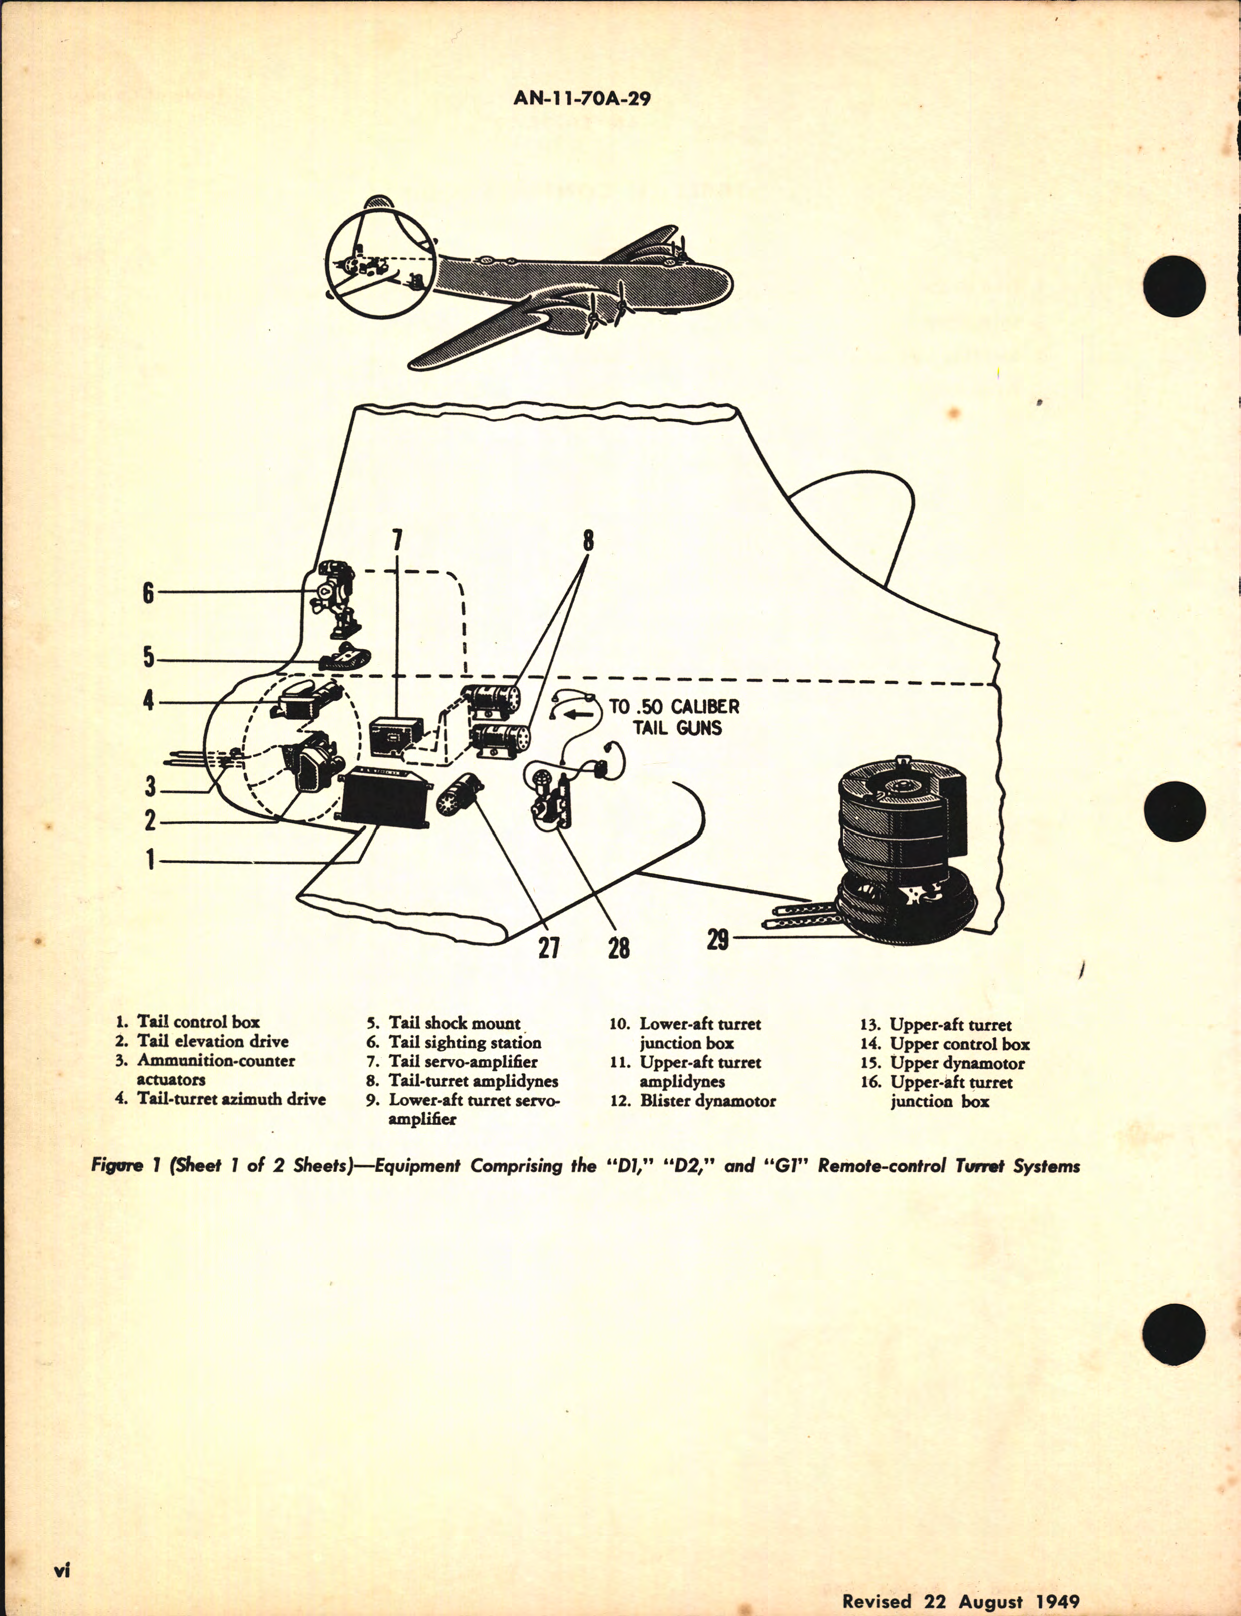 Sample page 8 from AirCorps Library document: Operation and Service Instructions for Remote Control Turret System